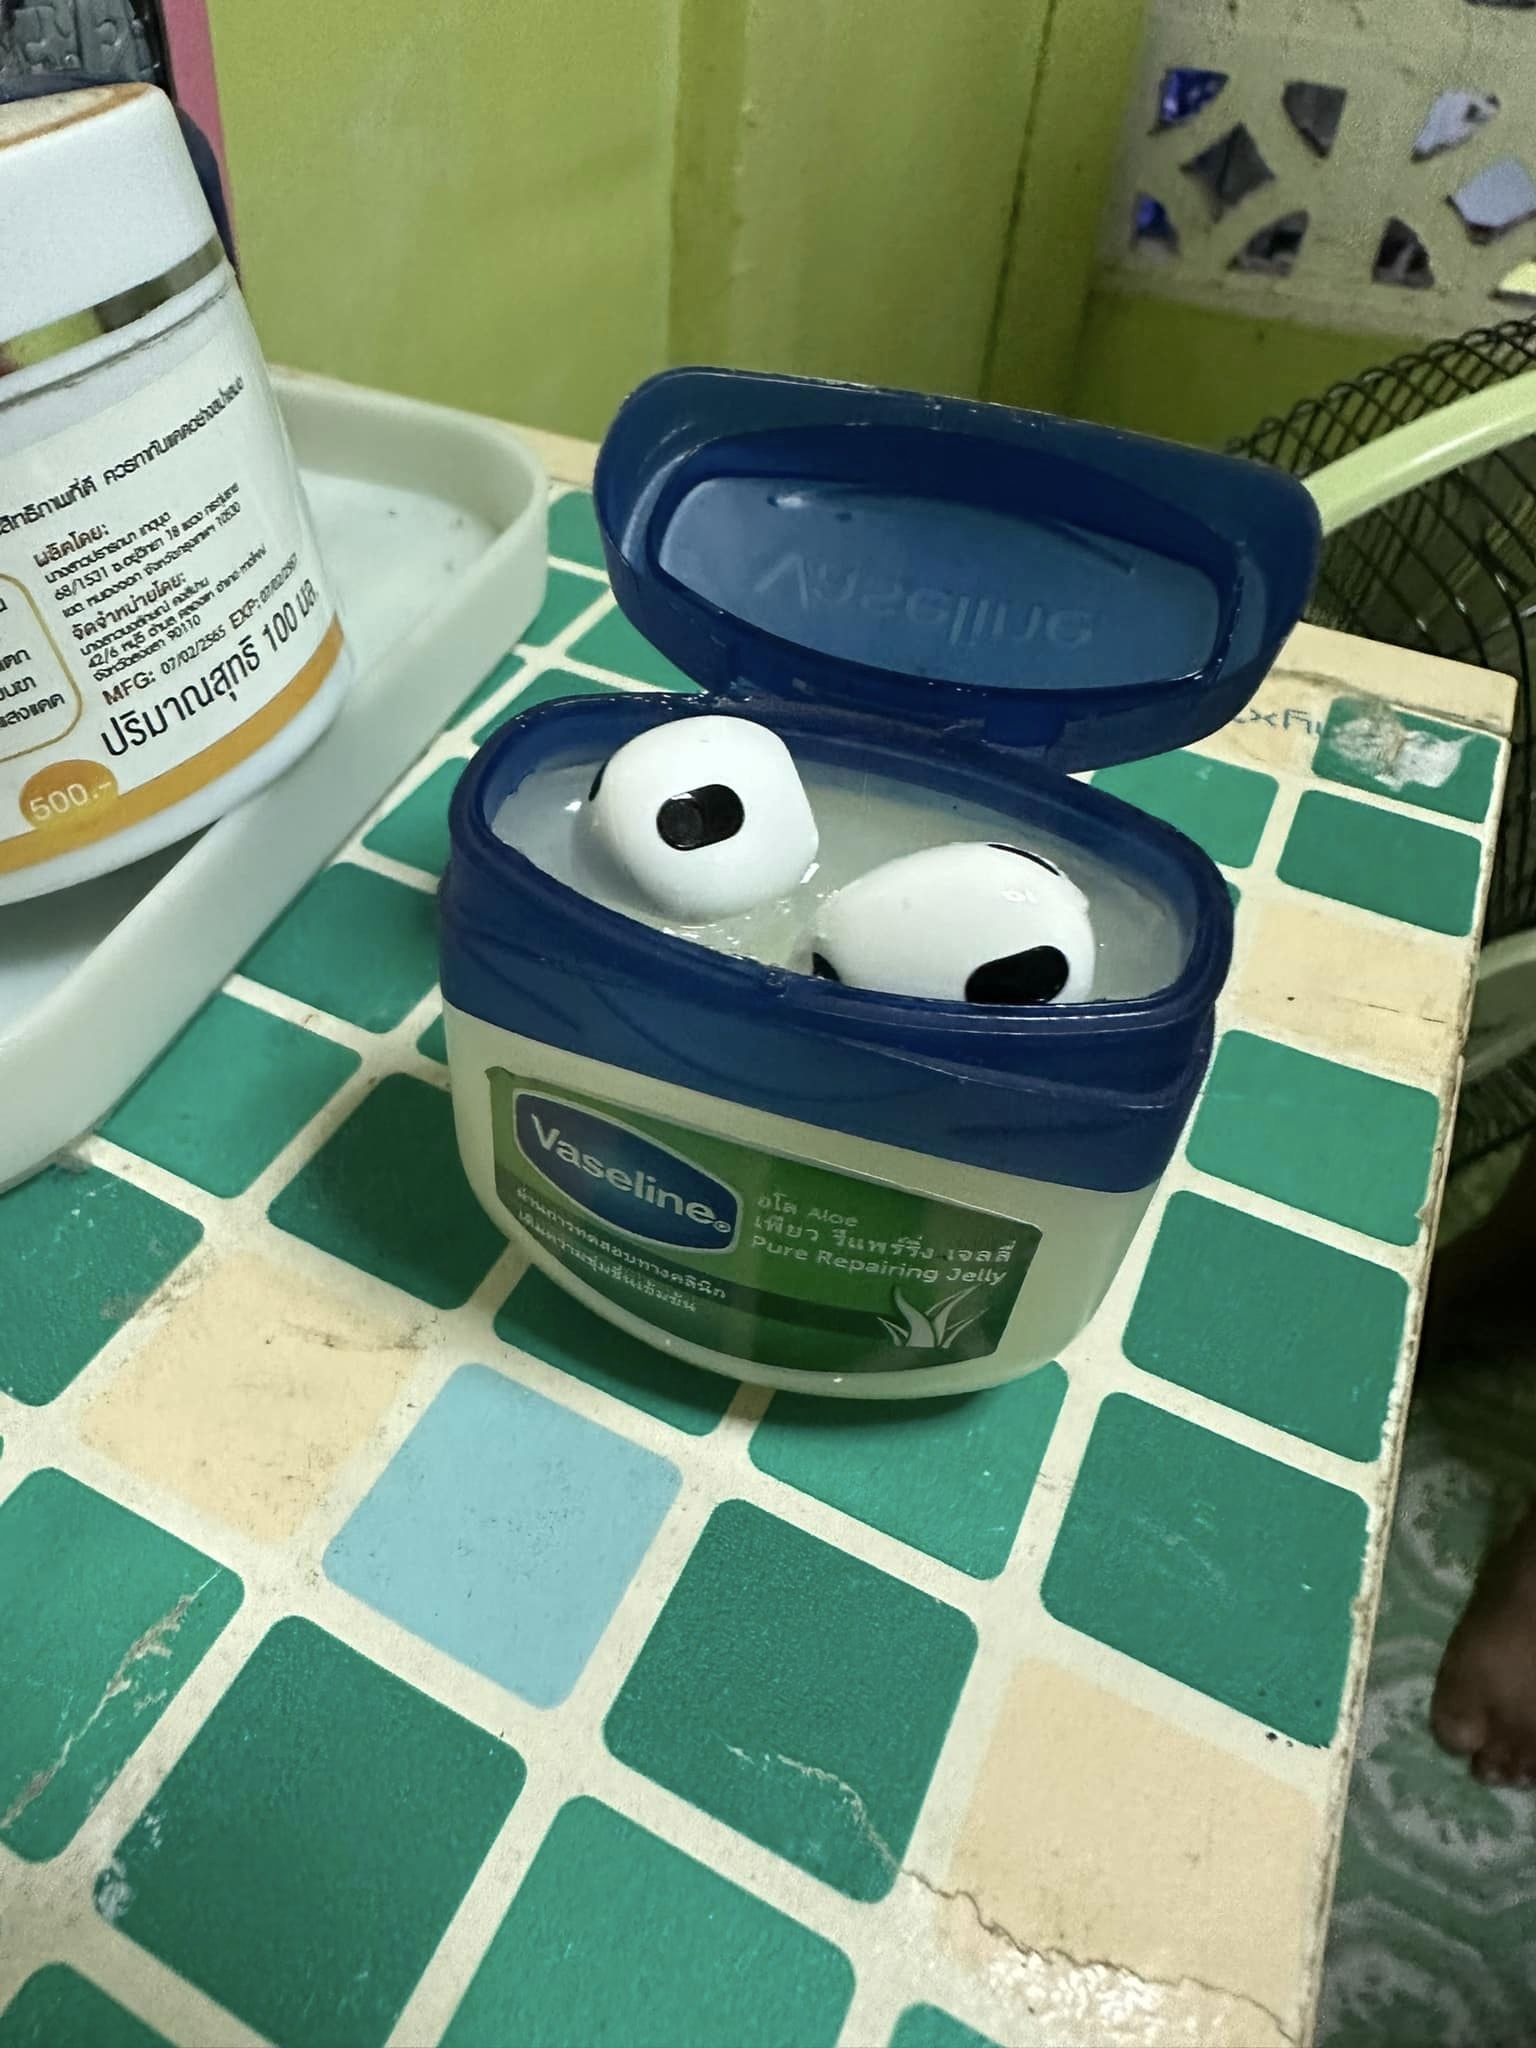 A Thai woman mistakenly stores her Airpods in Vaseline. 